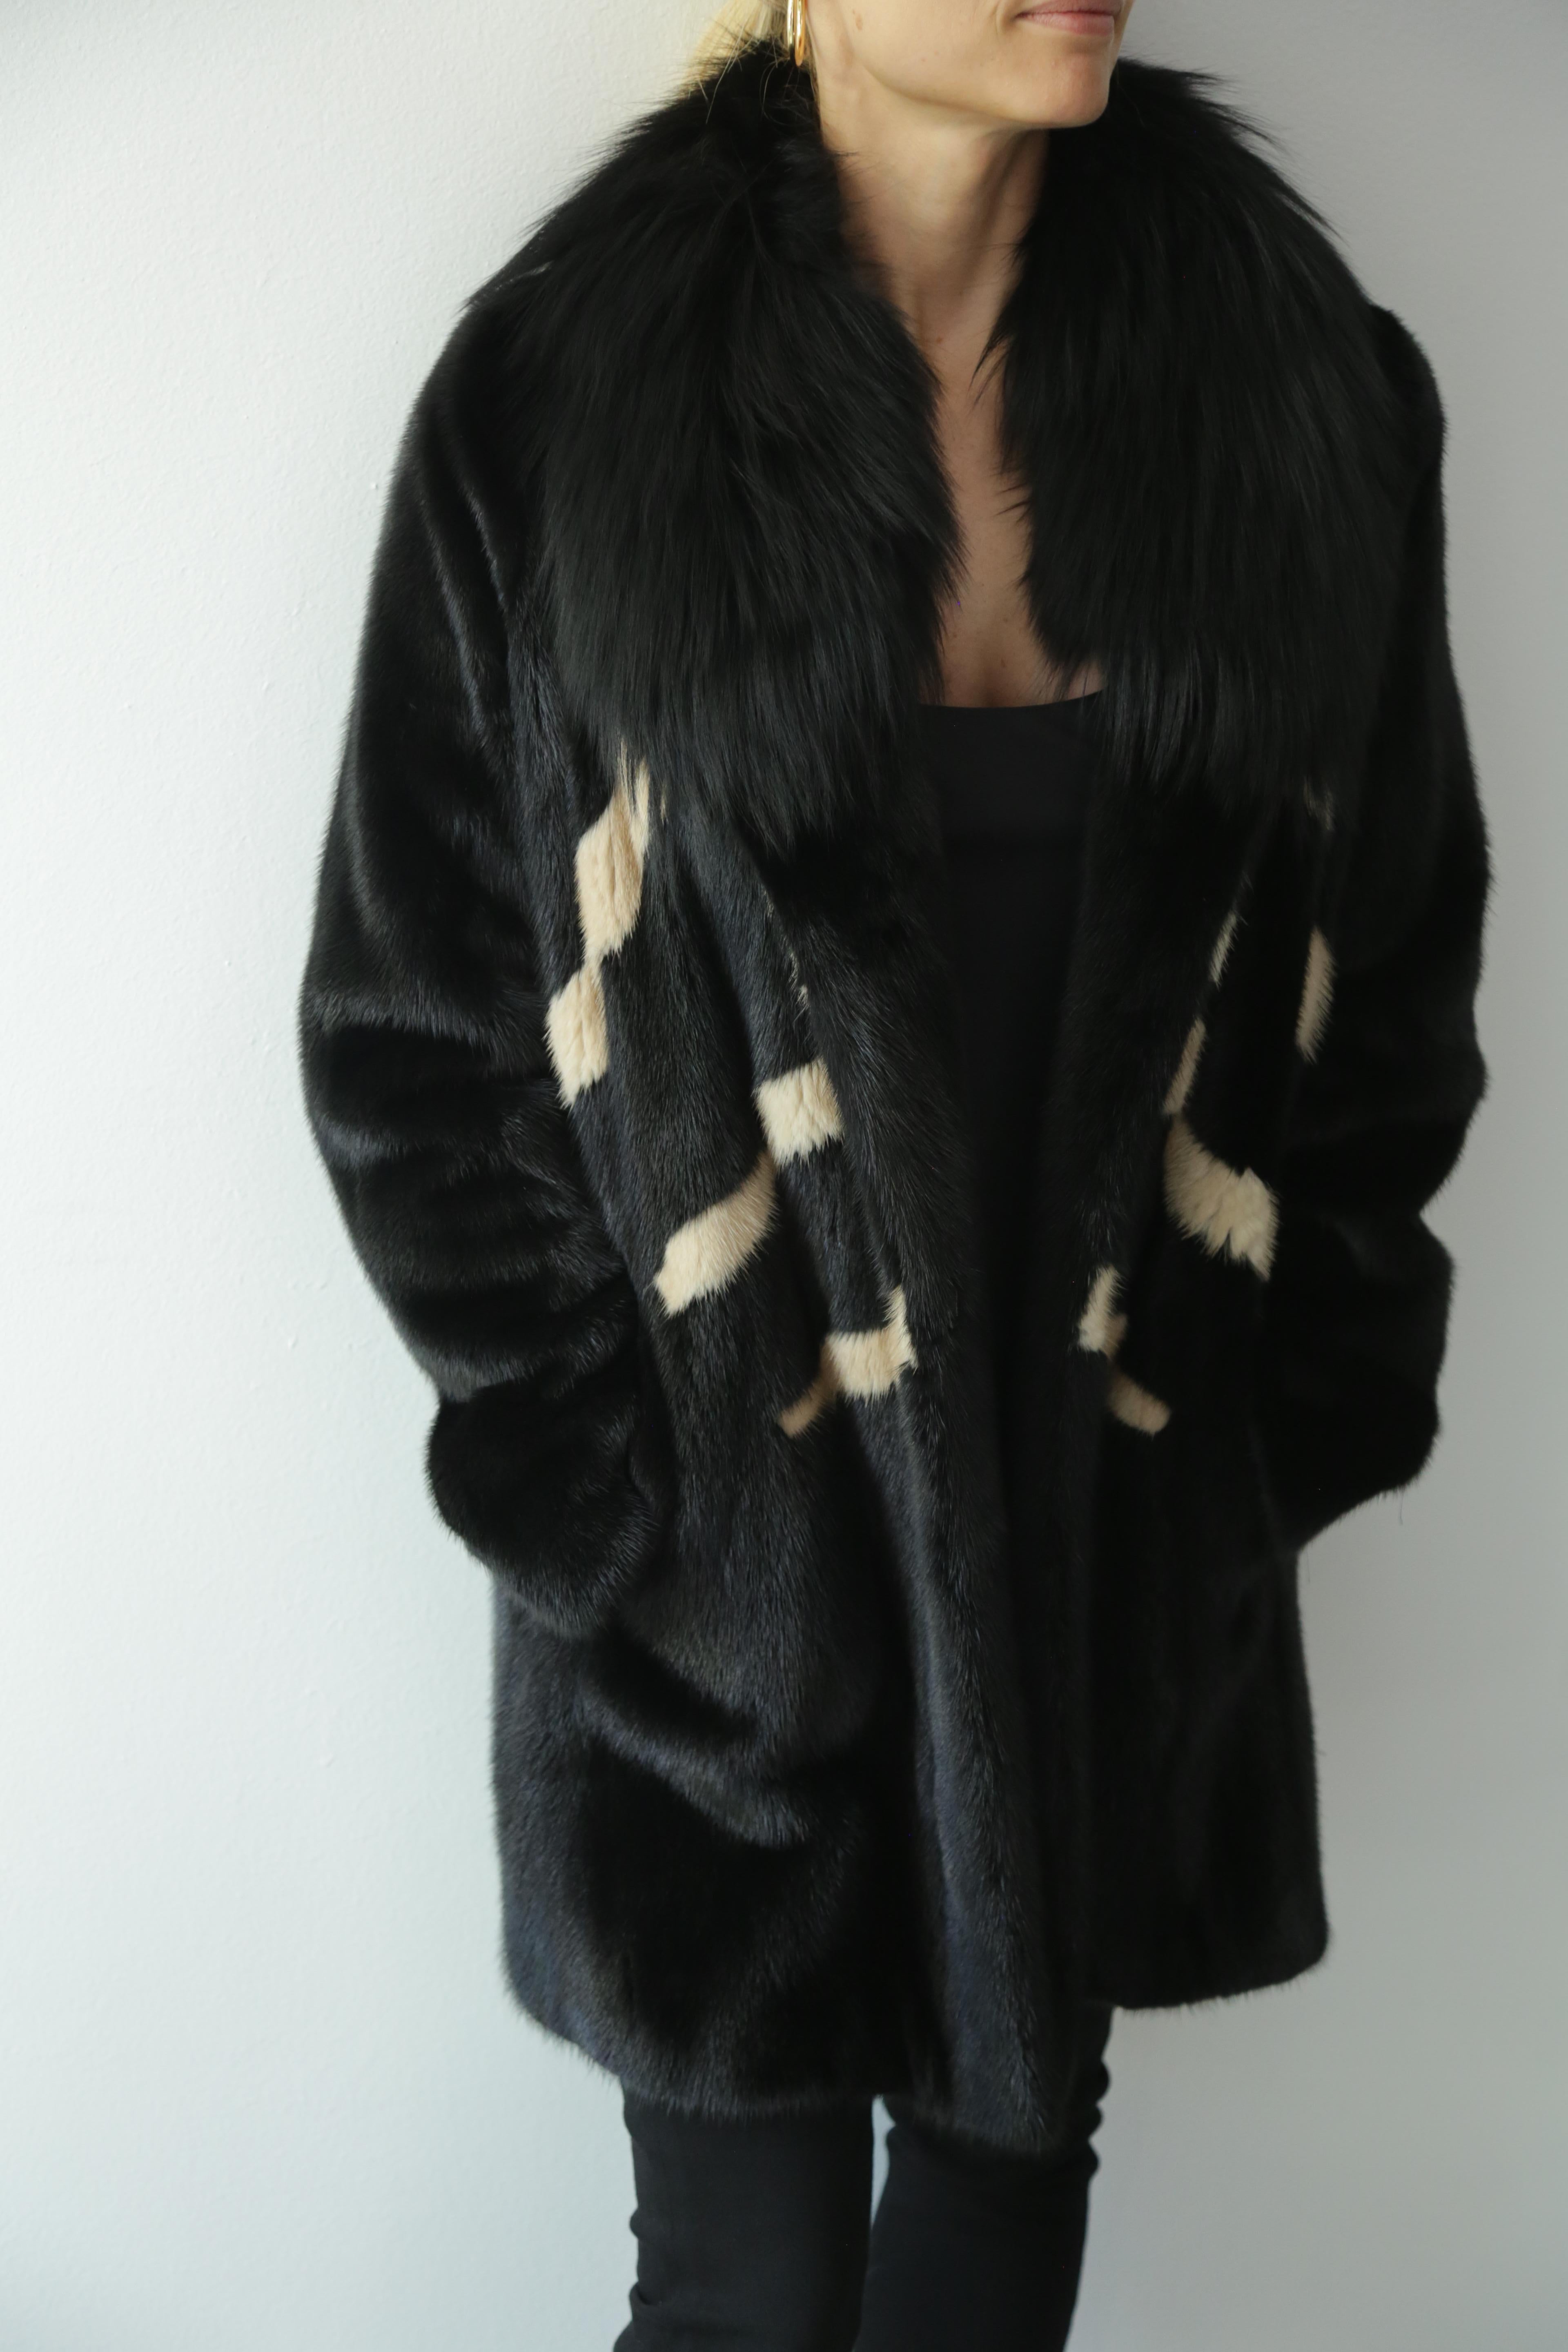 Caramel and Black **New never worn**  (NWT) coat. 
Original Price was $14,000
Size 6 
Body Real Fur Dyed and Natural Mink 
Collar Dyed Silver Fox 
Lining 100% Silk 
Pockets on the side 
Made in USA 
